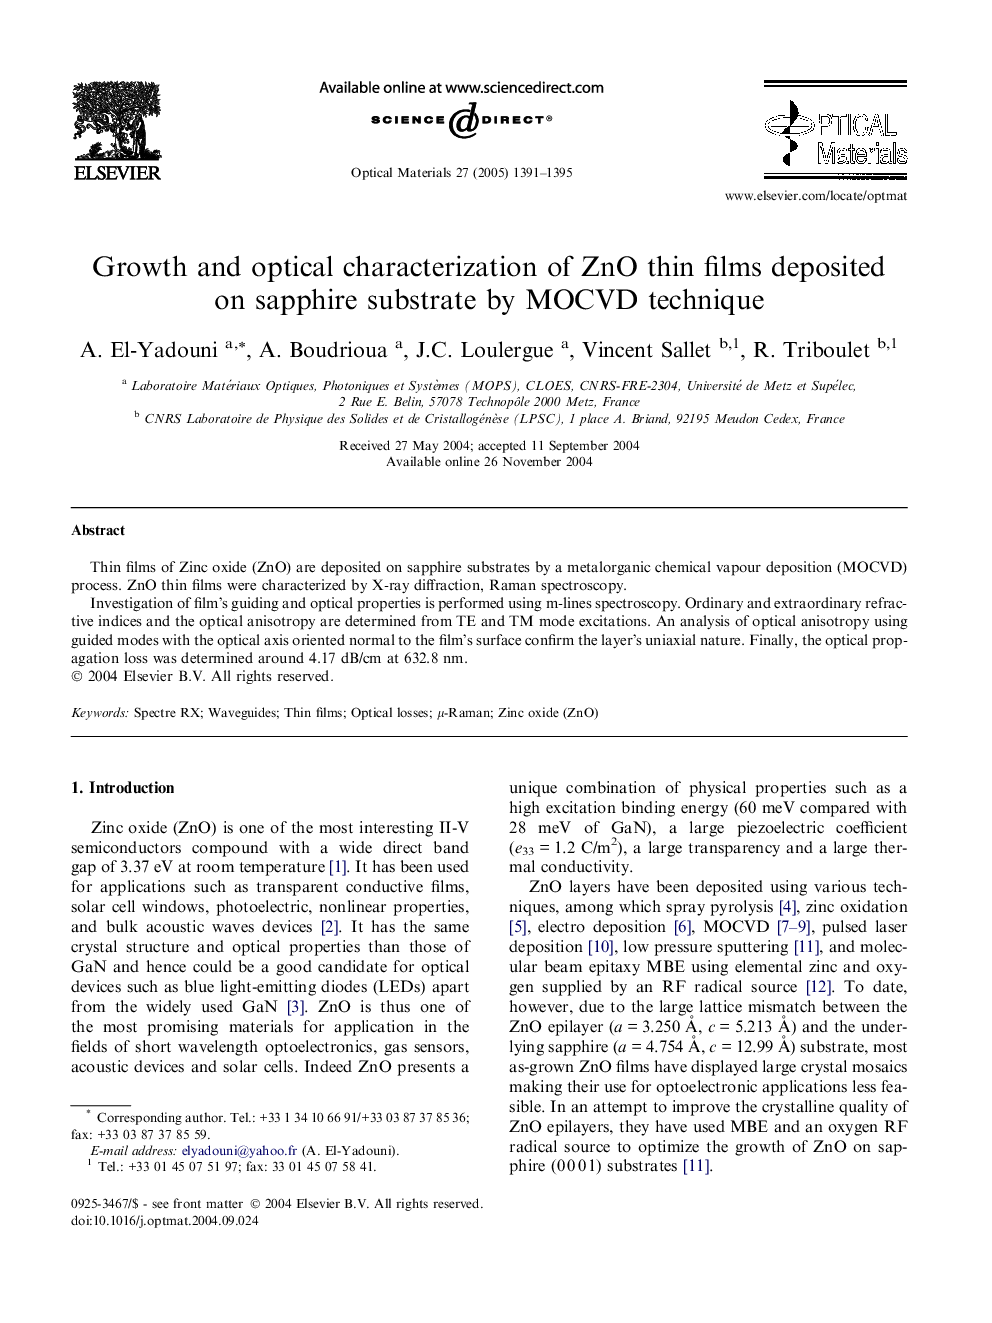 Growth and optical characterization of ZnO thin films deposited on sapphire substrate by MOCVD technique